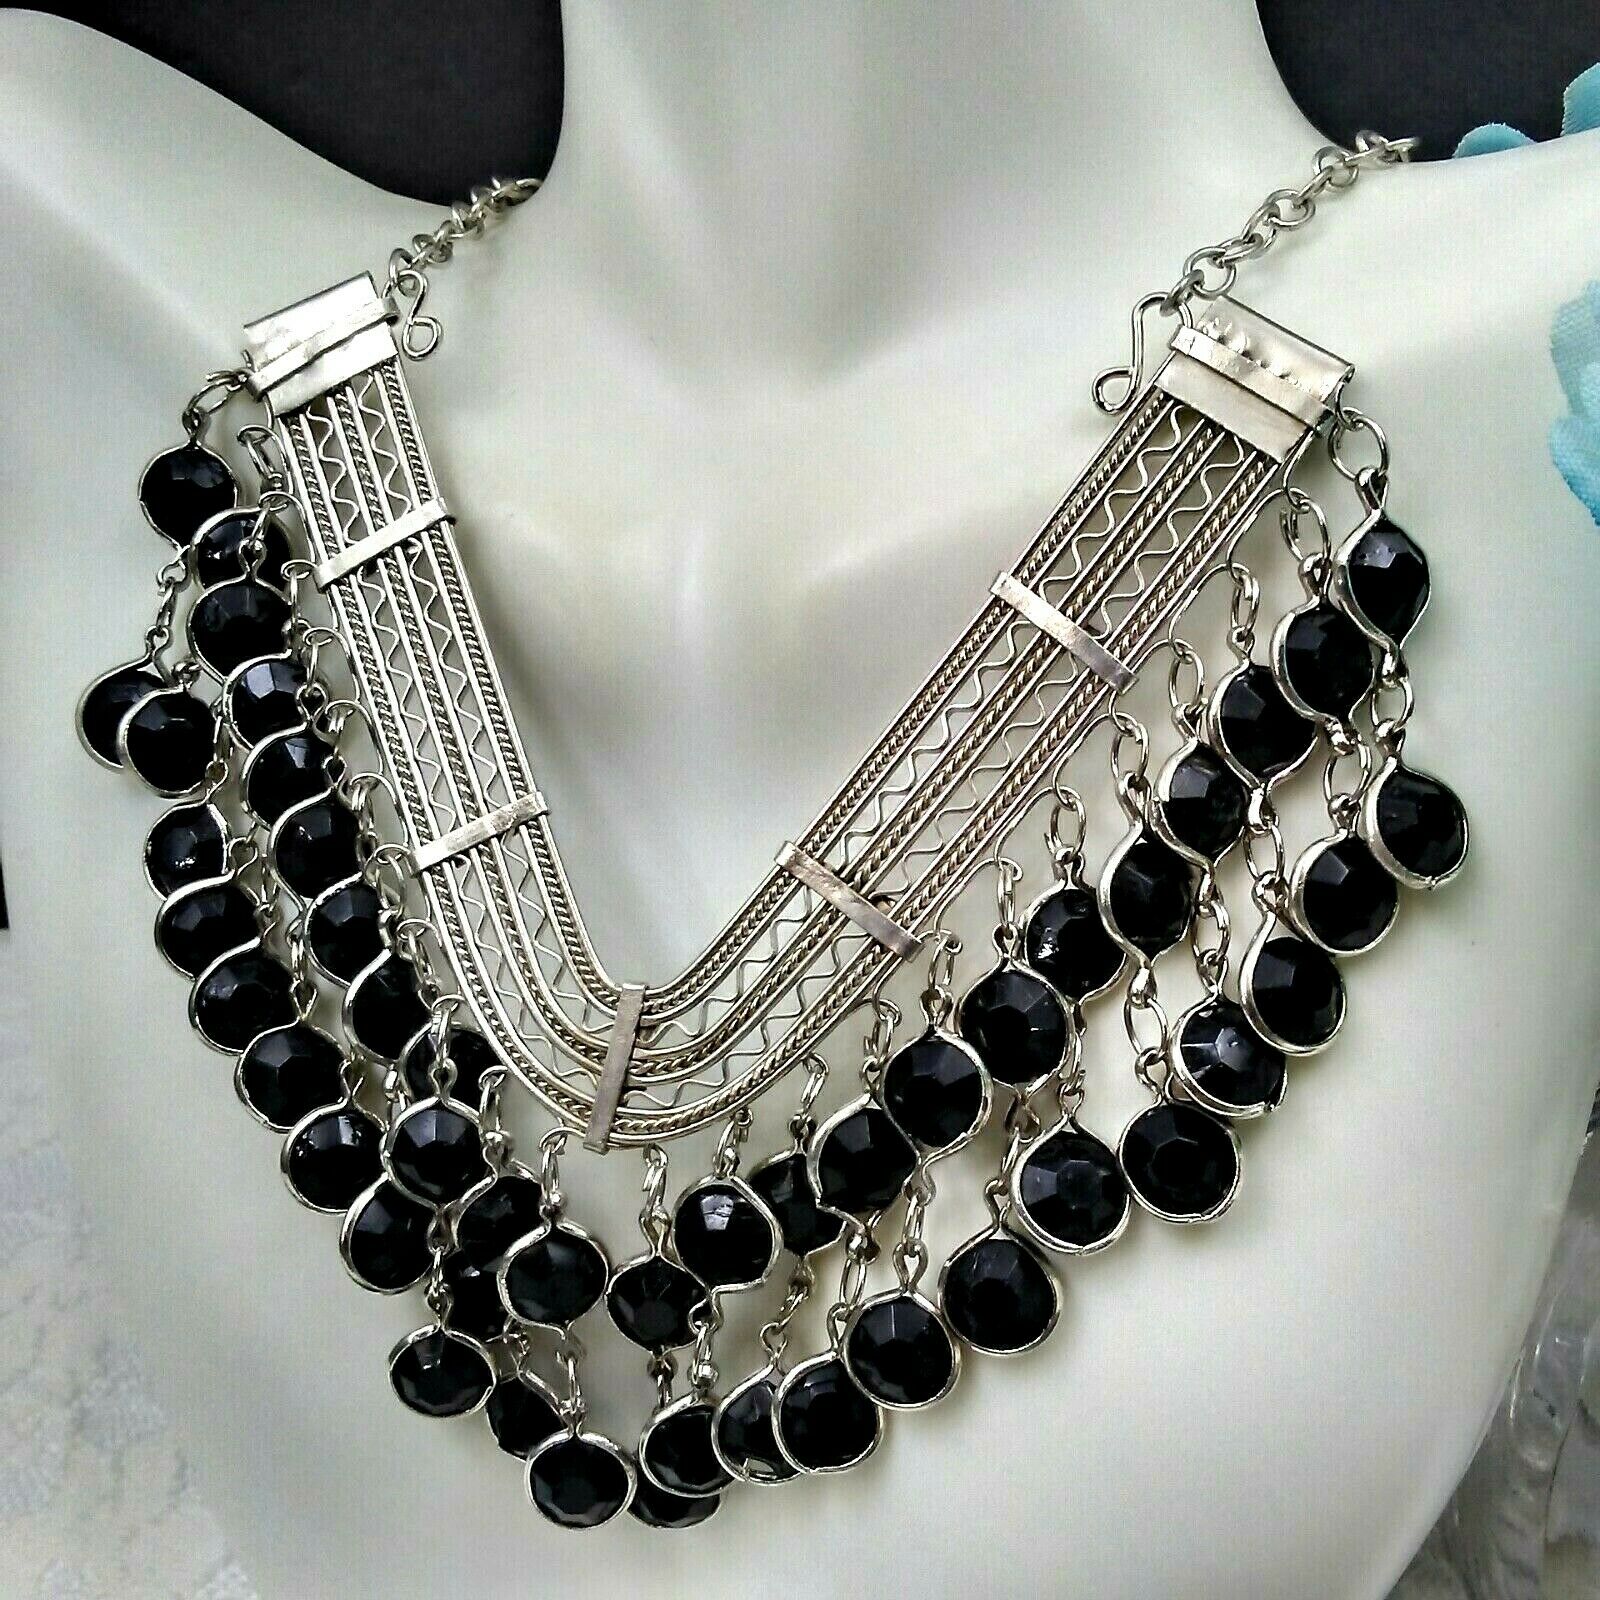 Estate Sale: Silver Tone Necklace With Black Glass Gems #18-1